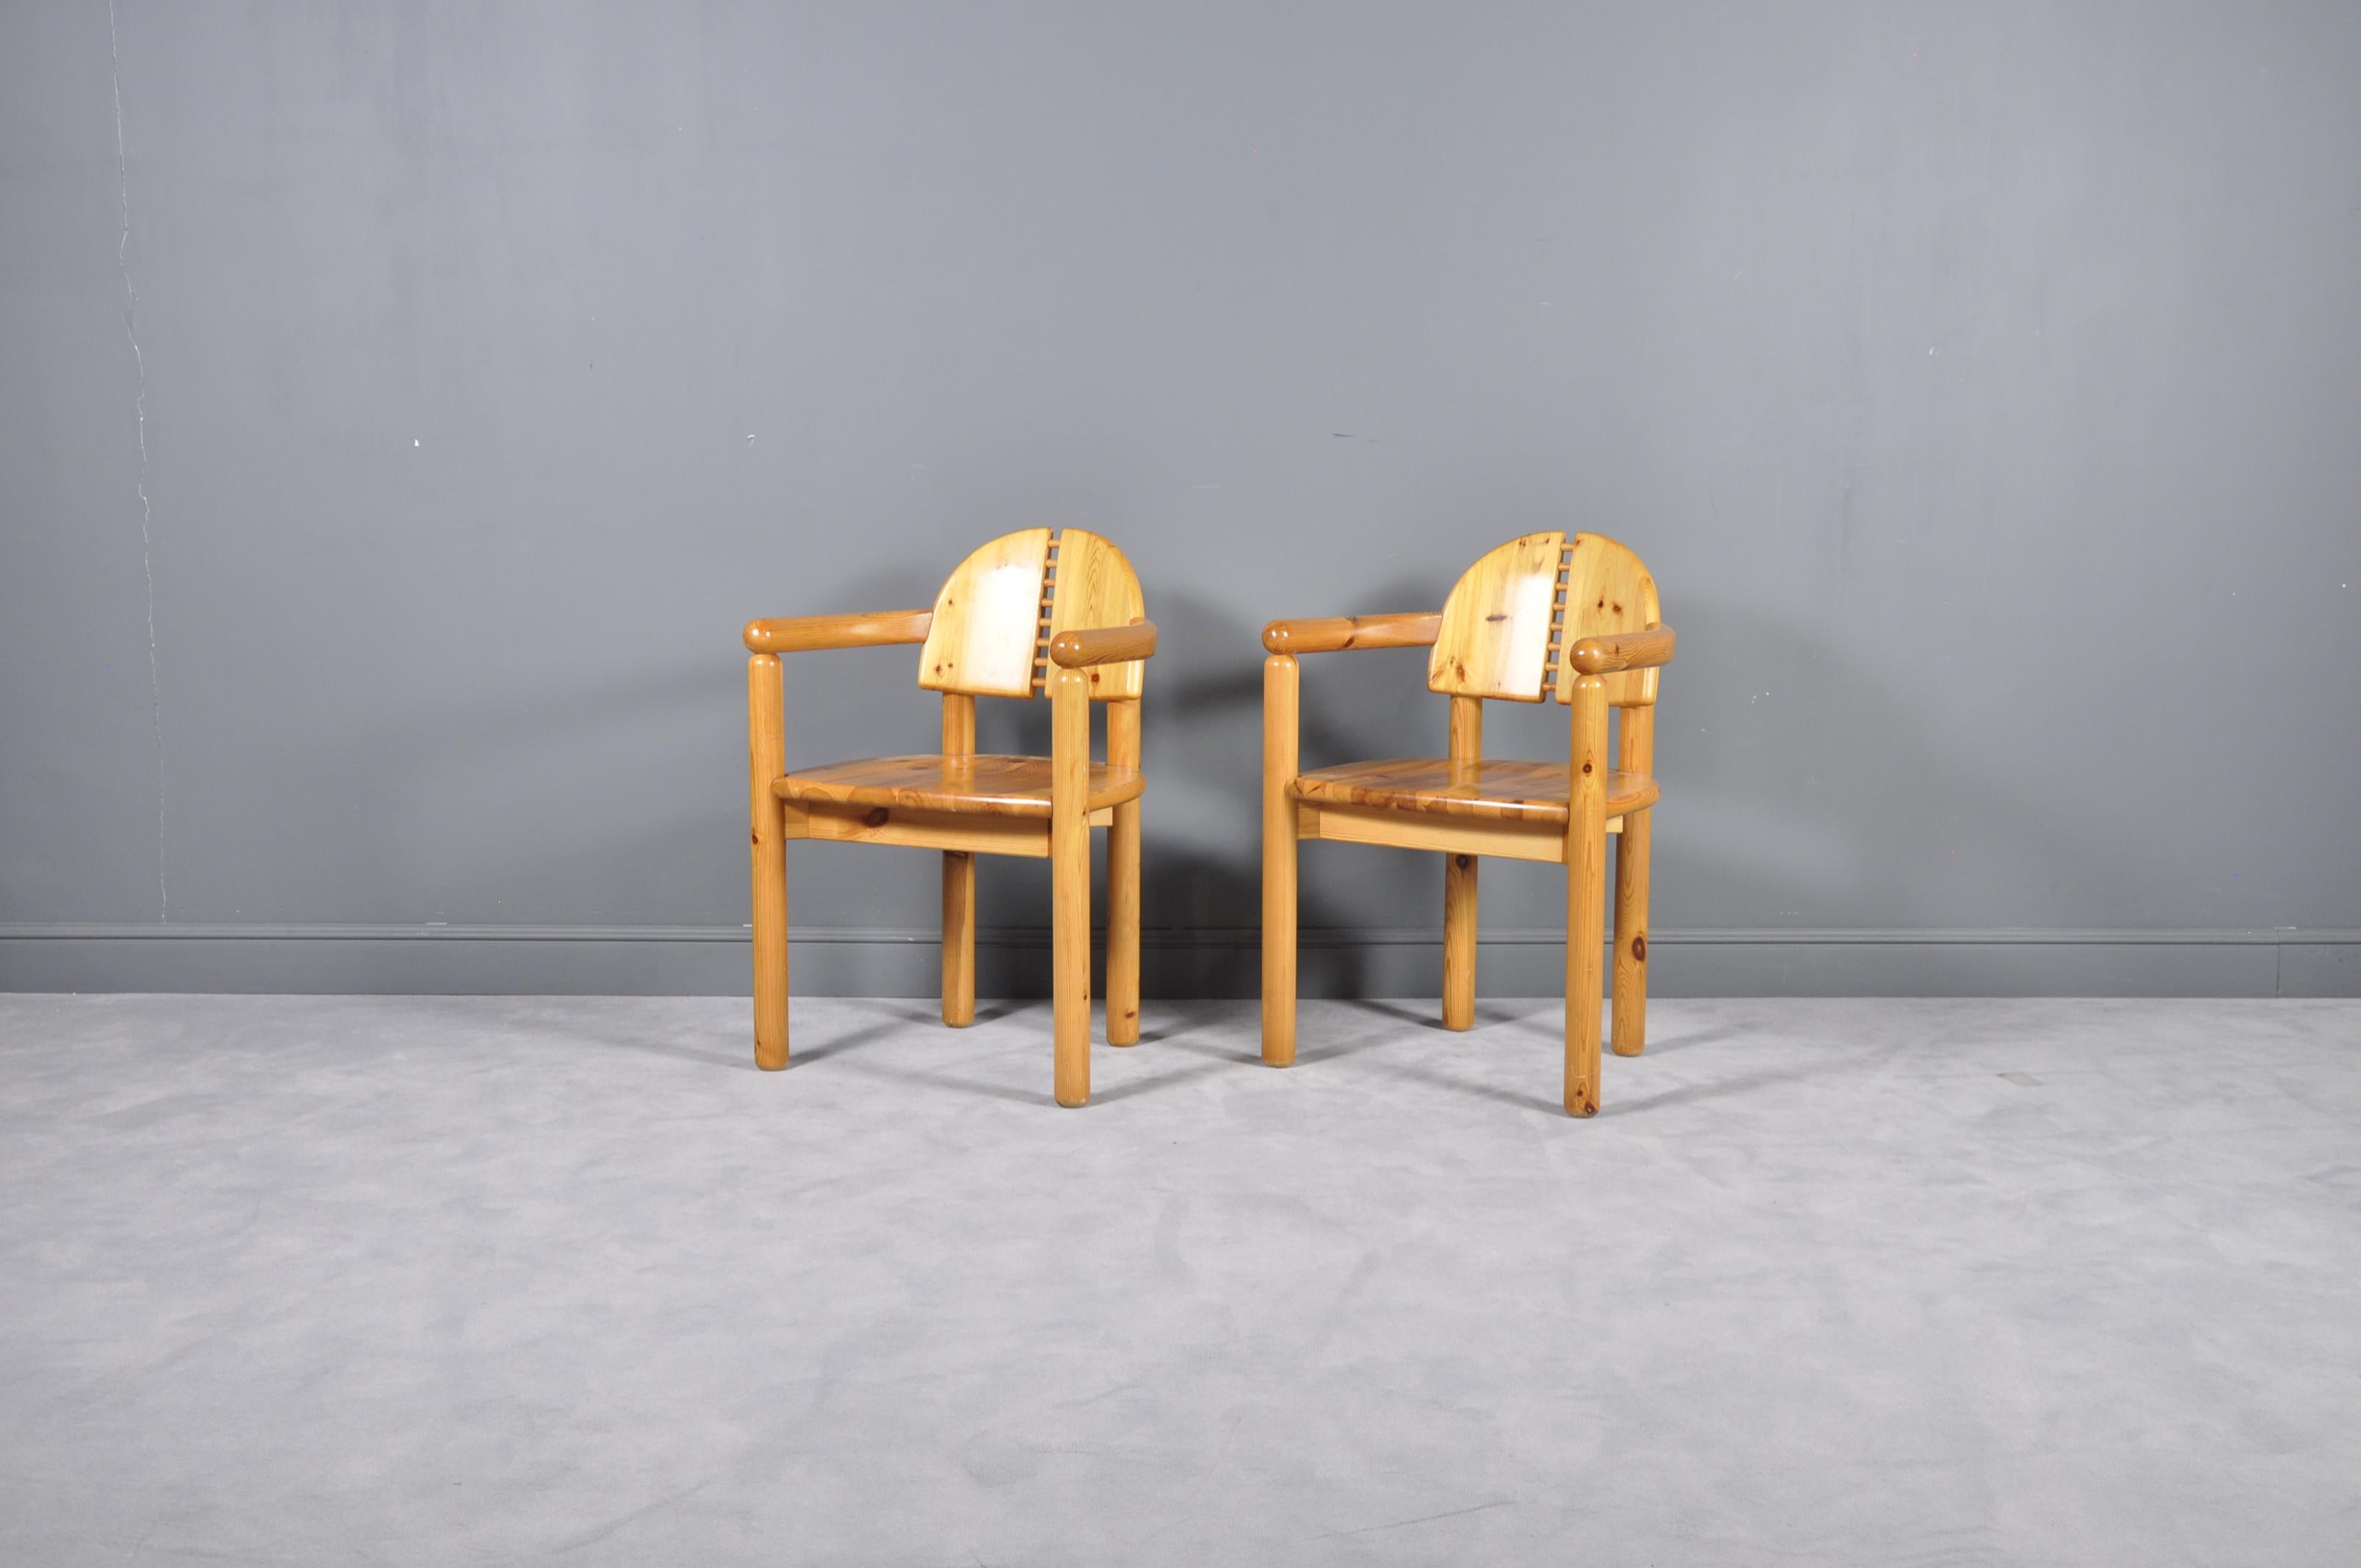 Wonderful set of two very sculptural dining room chairs in pinewood by Swedish designer Rainer Daumiller, manufactured by Hirtshalls Sawmills. Notice the beautifully carved organic lines of the seats and the general natural feel of the grained